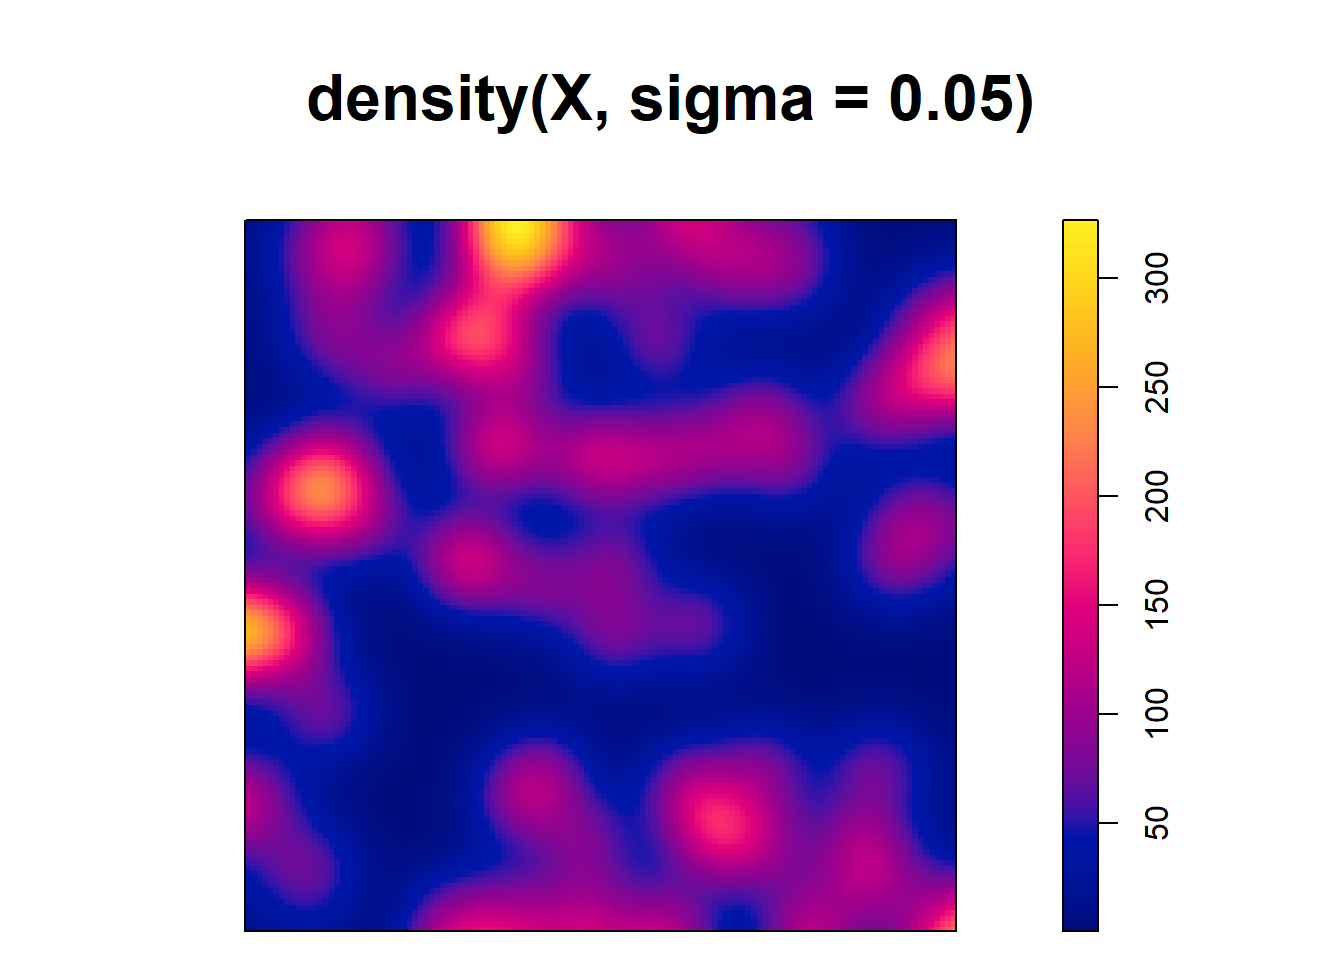 Top: Trees point pattern. Bottom: Intensity estimates using several values for the kernel bandwidth.